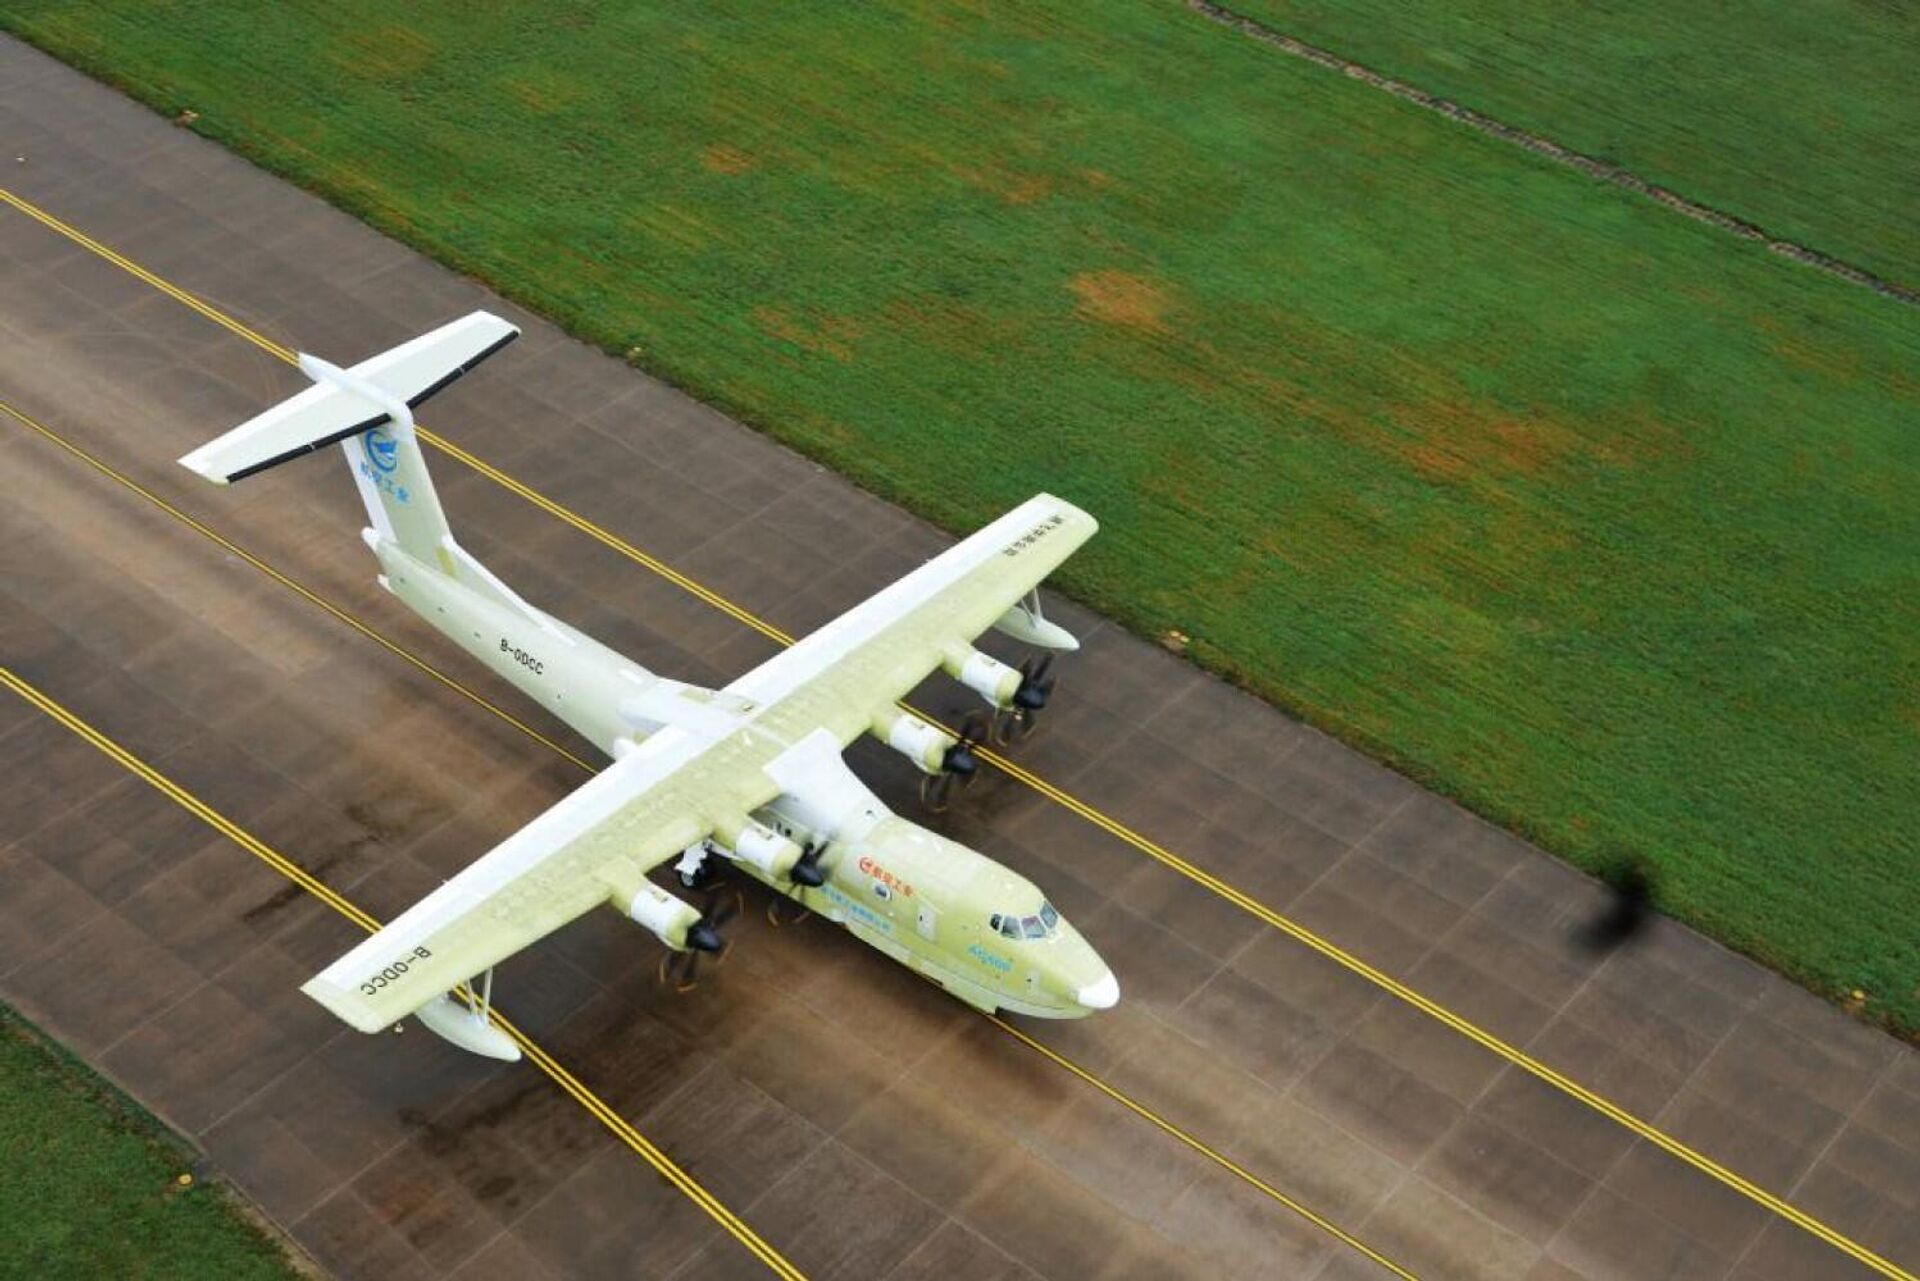 A full-state new-configuration model of China's AG600 large amphibious aircraft lands at the airport after conducting the maiden flight in Zhuhai, south China's Guangdong Province, on May 31, 2022. This new-configuration AG600 amphibious aircraft conducted a successful maiden flight on Tuesday, according to the Aviation Industry Corporation of China (AVIC) - Sputnik International, 1920, 31.05.2022